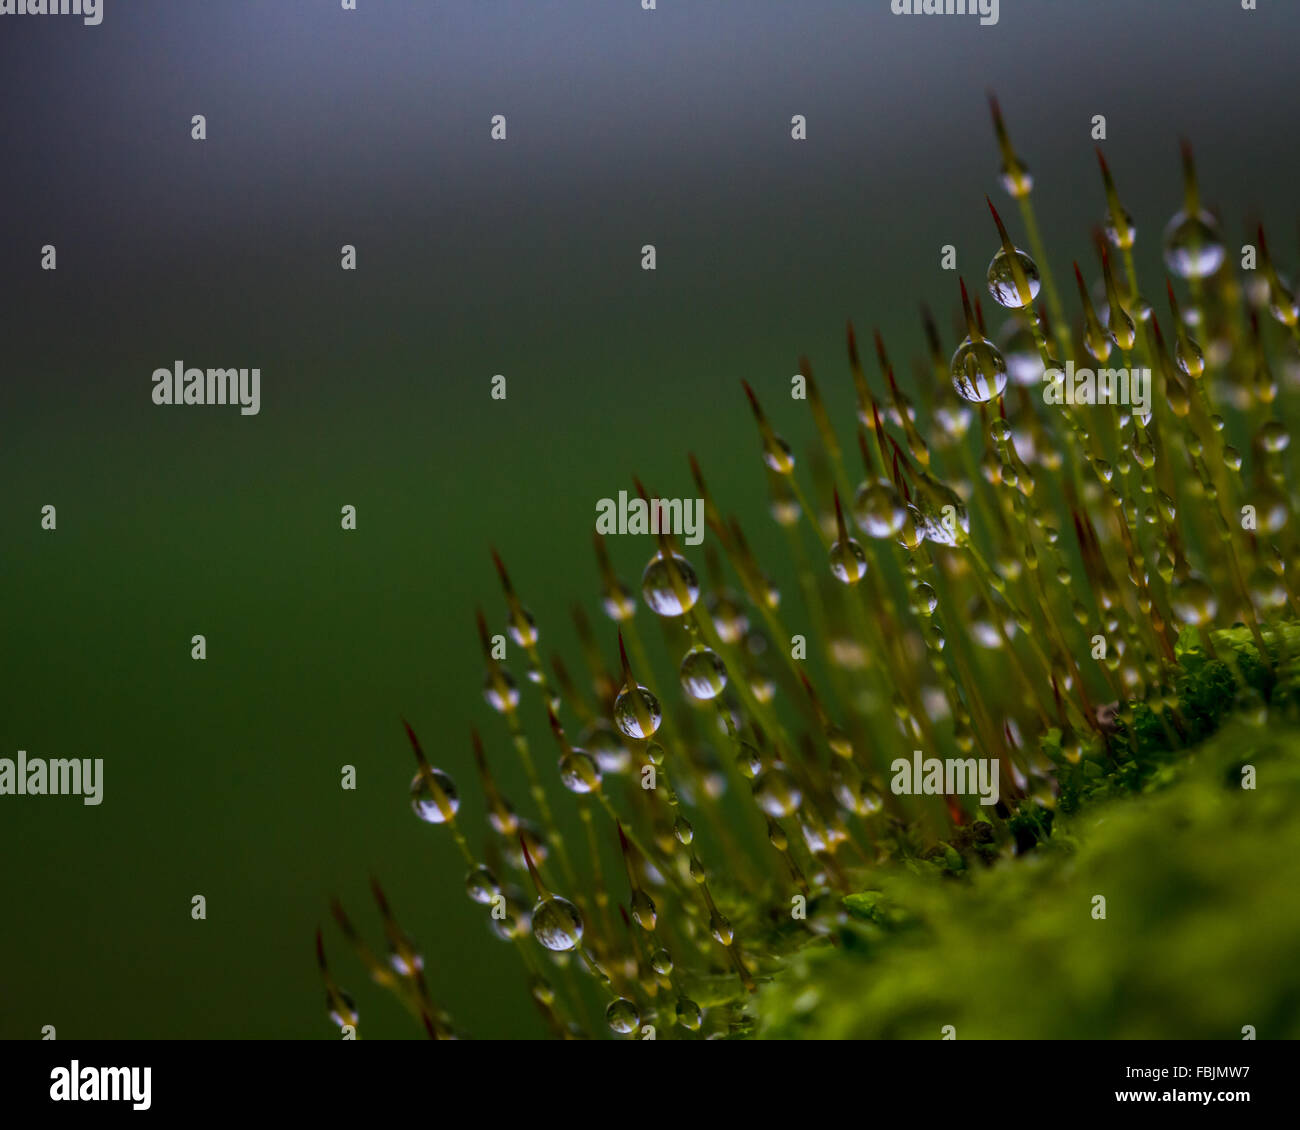 Dew drops on moss Stock Photo